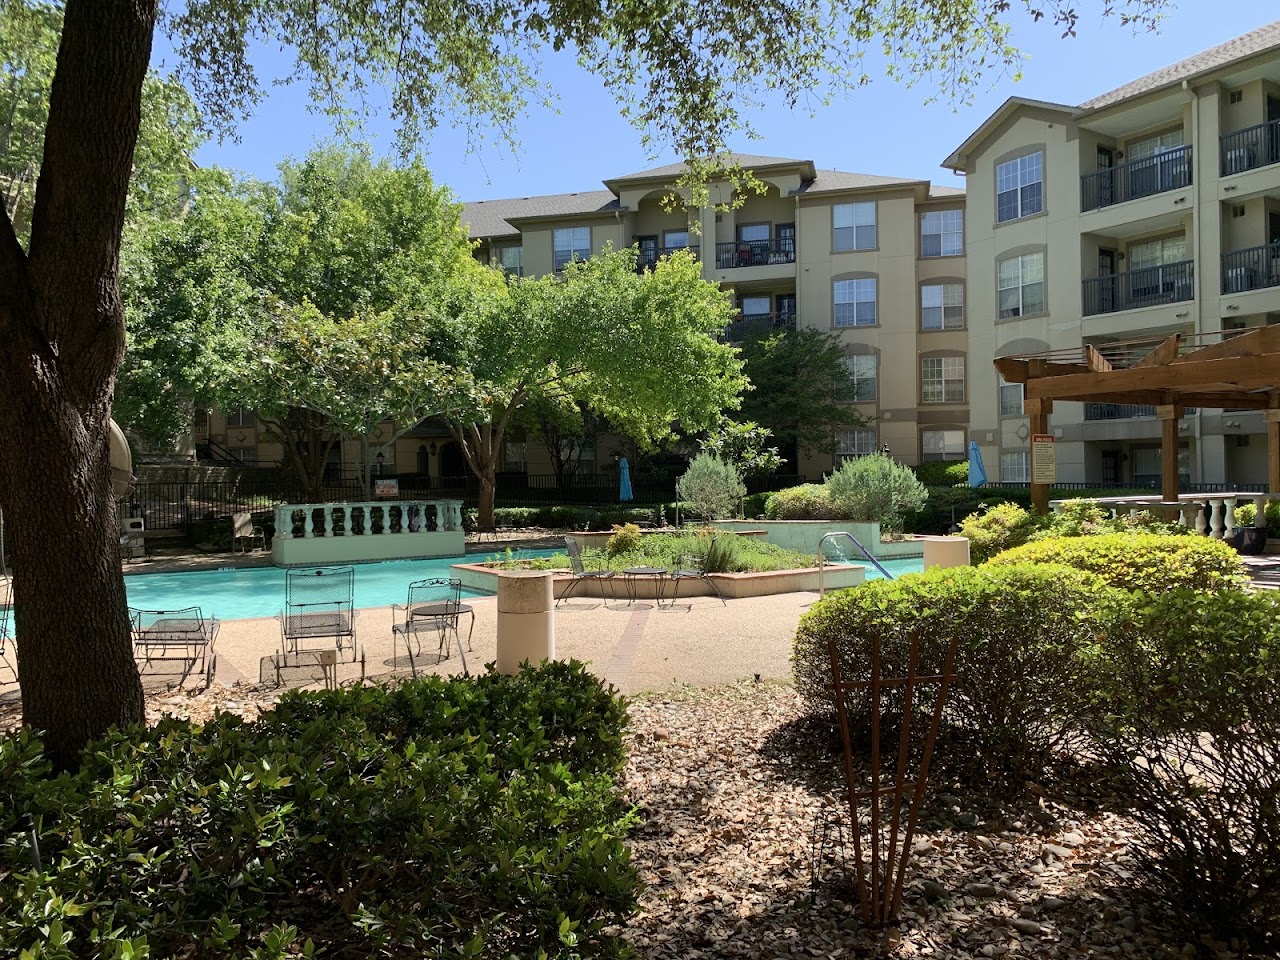 Photo of WATERFORD AT GOLDMARK. Affordable housing located at 13695 GOLDMARK DR DALLAS, TX 75240